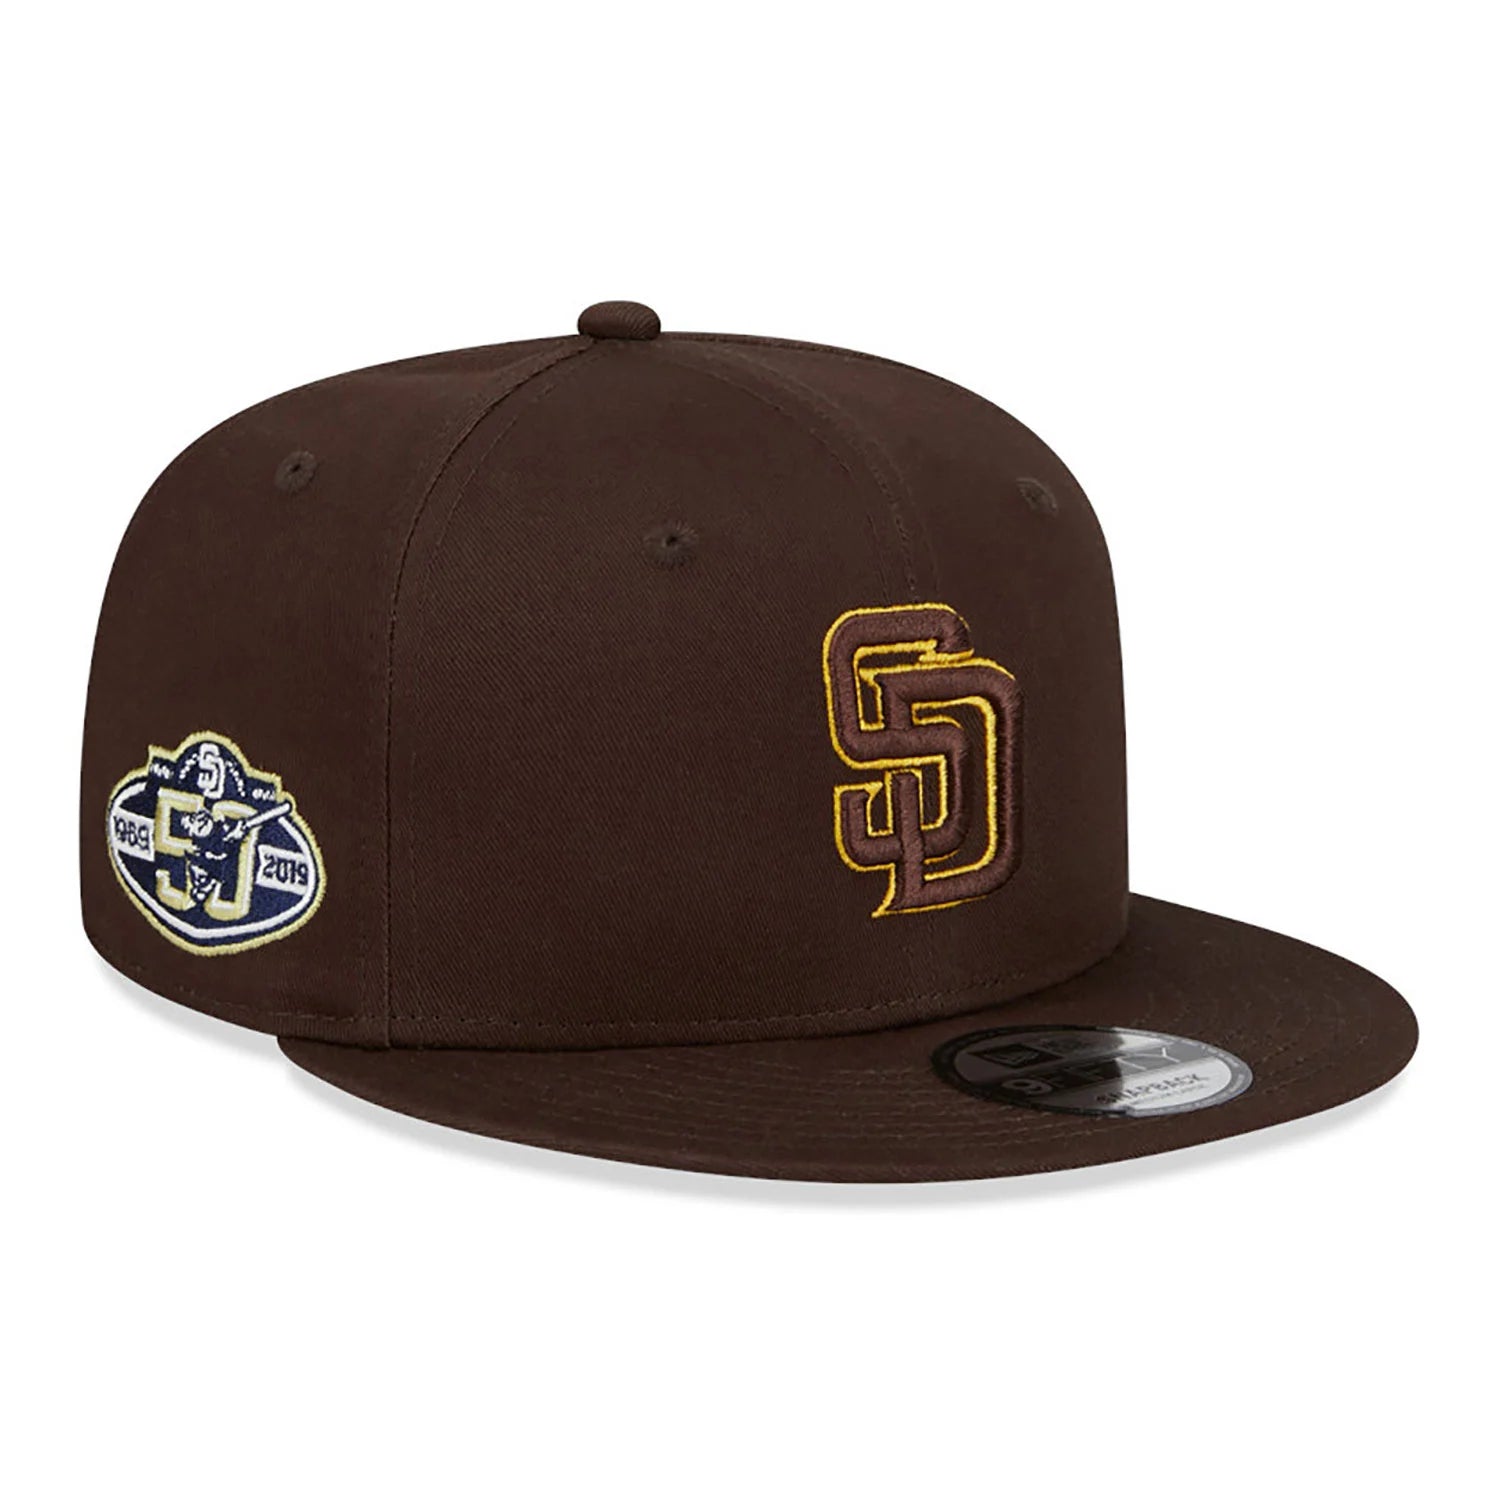 NEW ERA 9FIFTY SIDE PATCH SAN DIEGO PADRES 50TH ANNIVERSARY BROWN / LIGHT BROWN UV SNAPBACK CAP